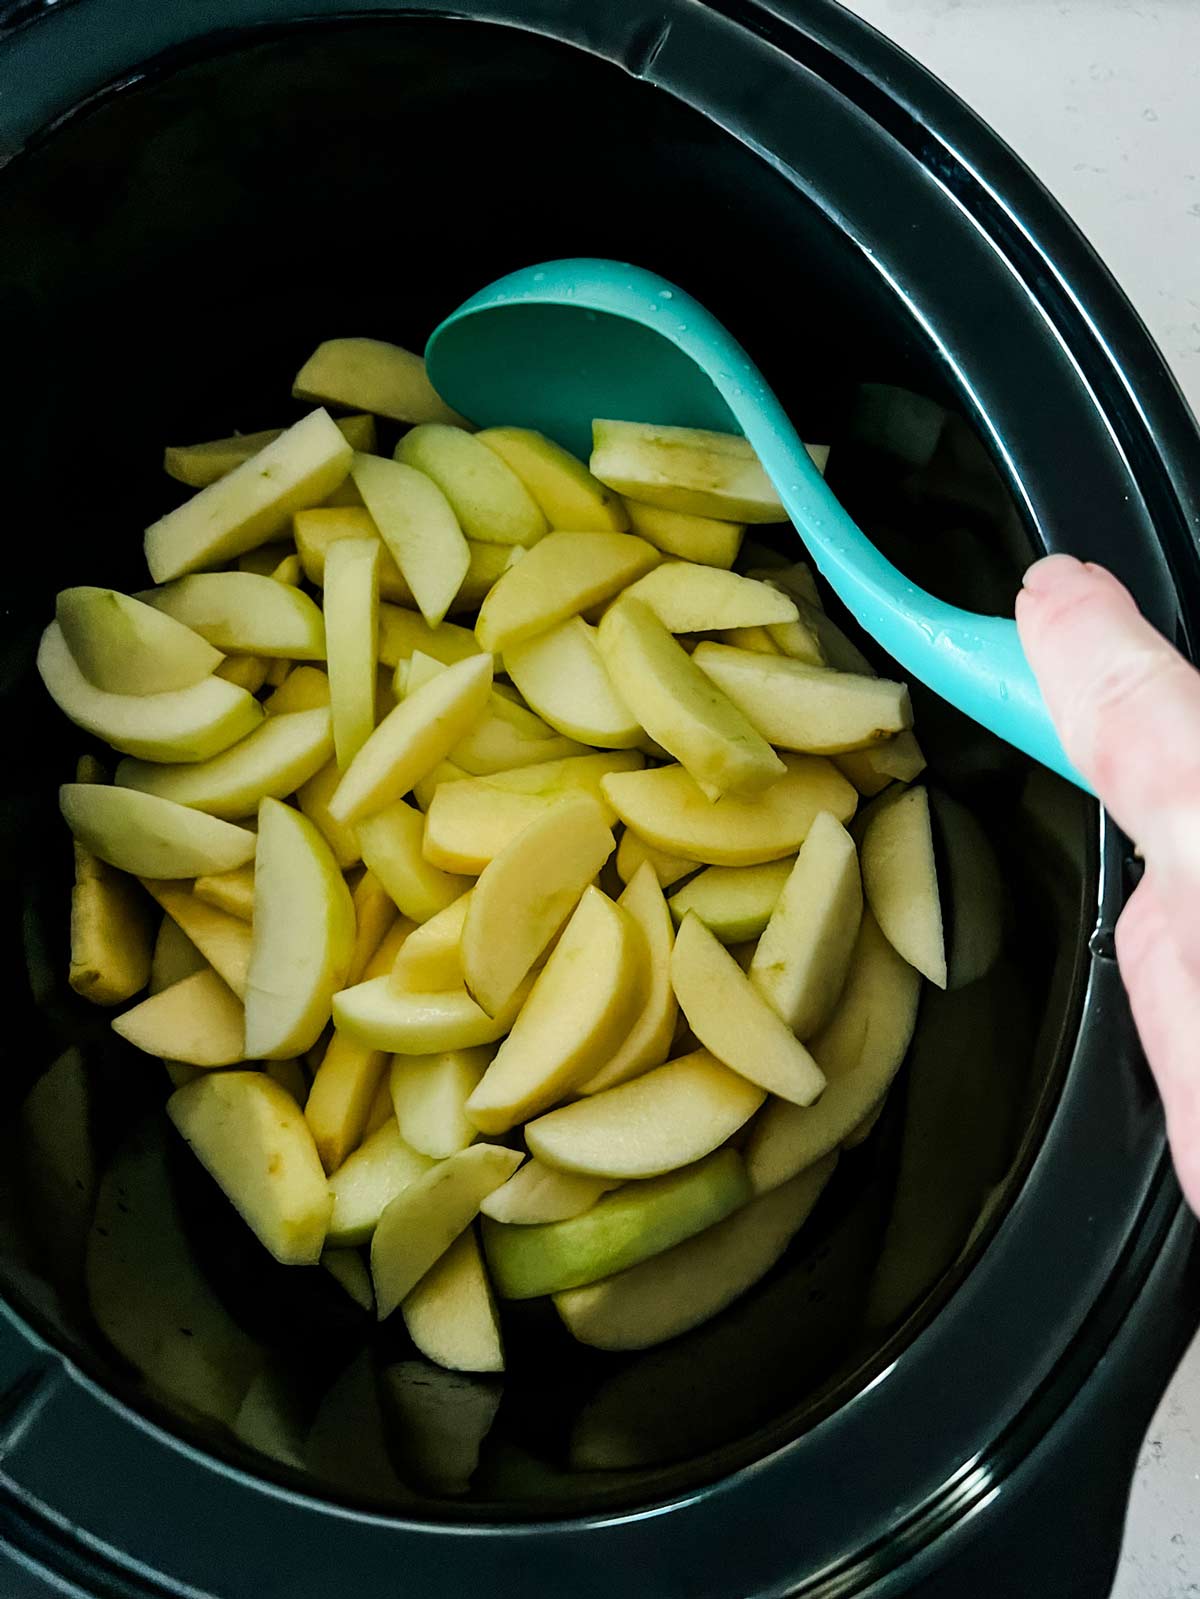 Peeled and sliced apples being tossed with lemon juice in a slow cooker.